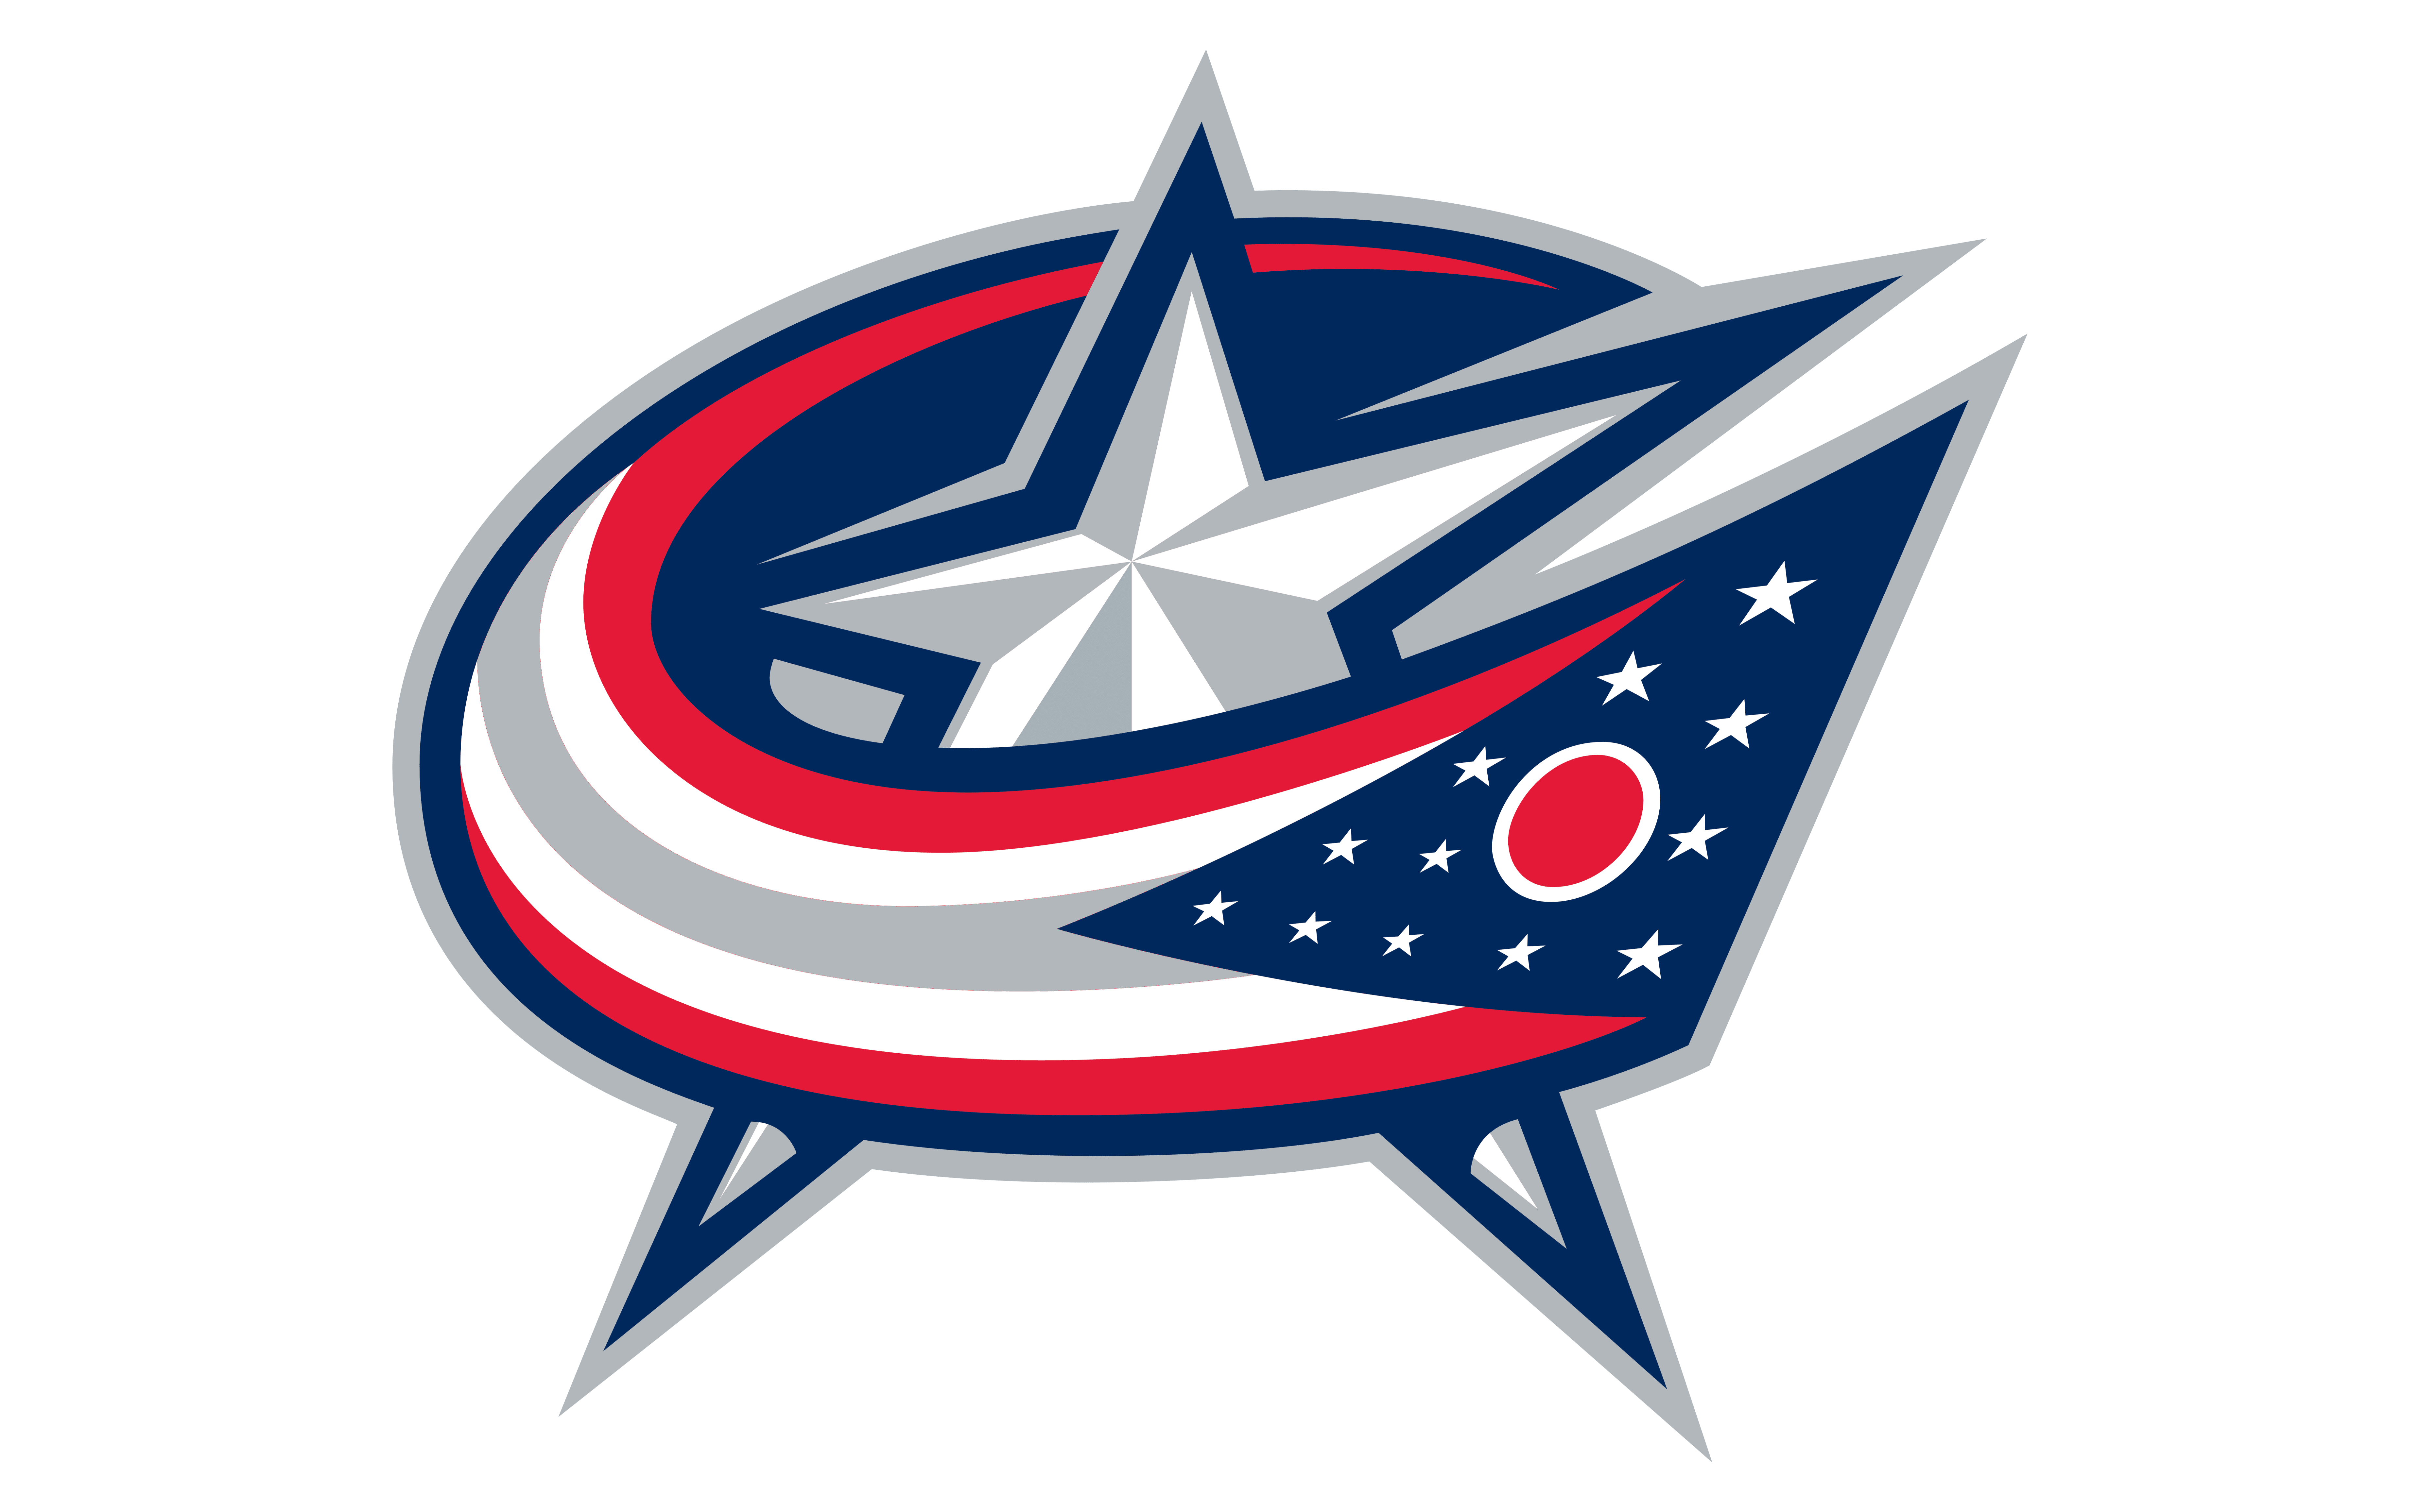 Rebrand Concepts in 2023  Columbus blue jackets, Blue jacket